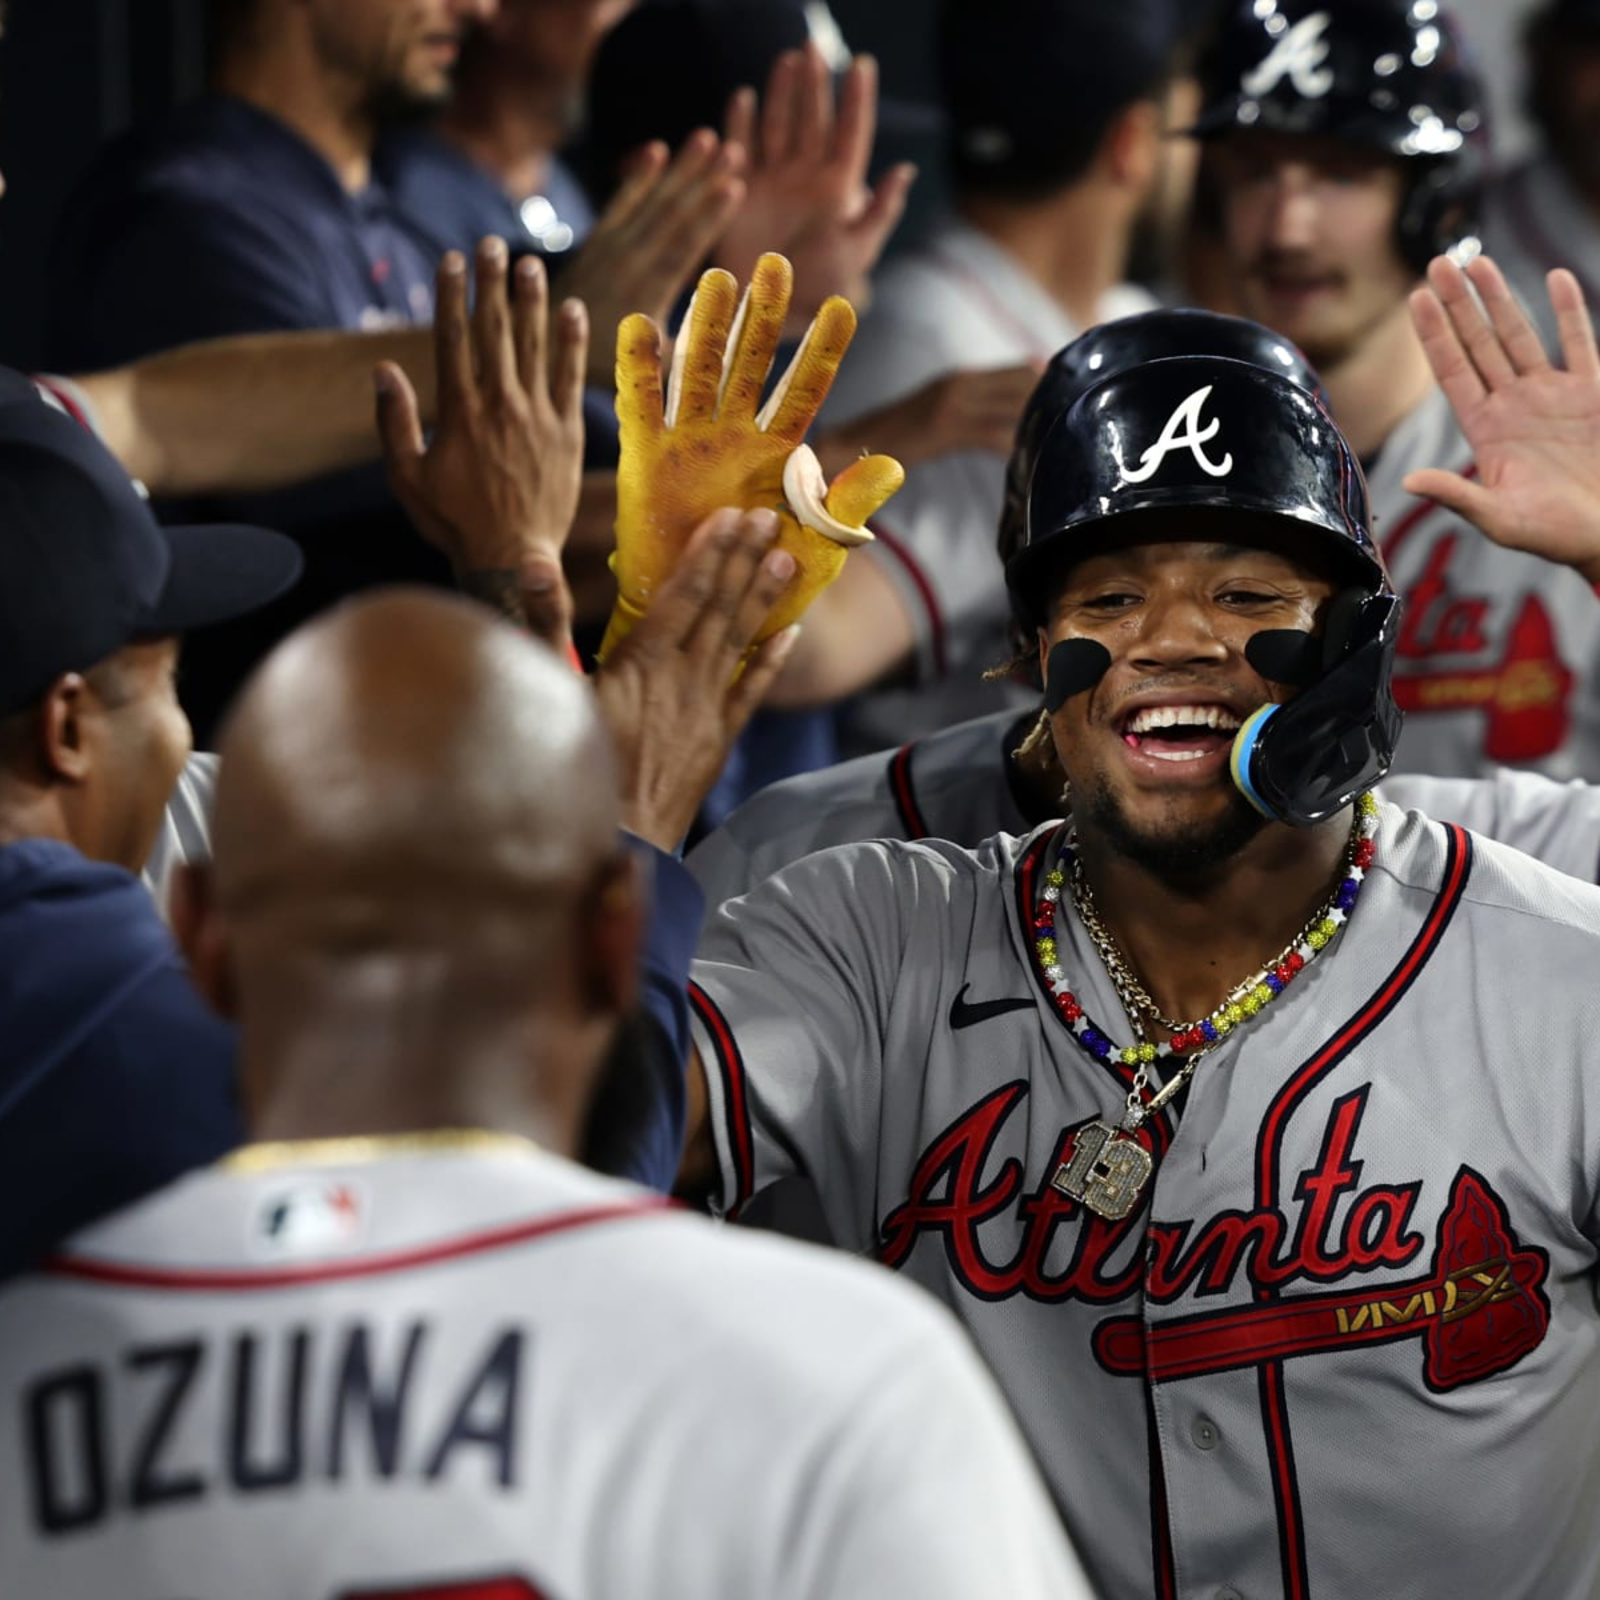 Braves All-Star wants to 'get rid of the fans' at games: 'I don't